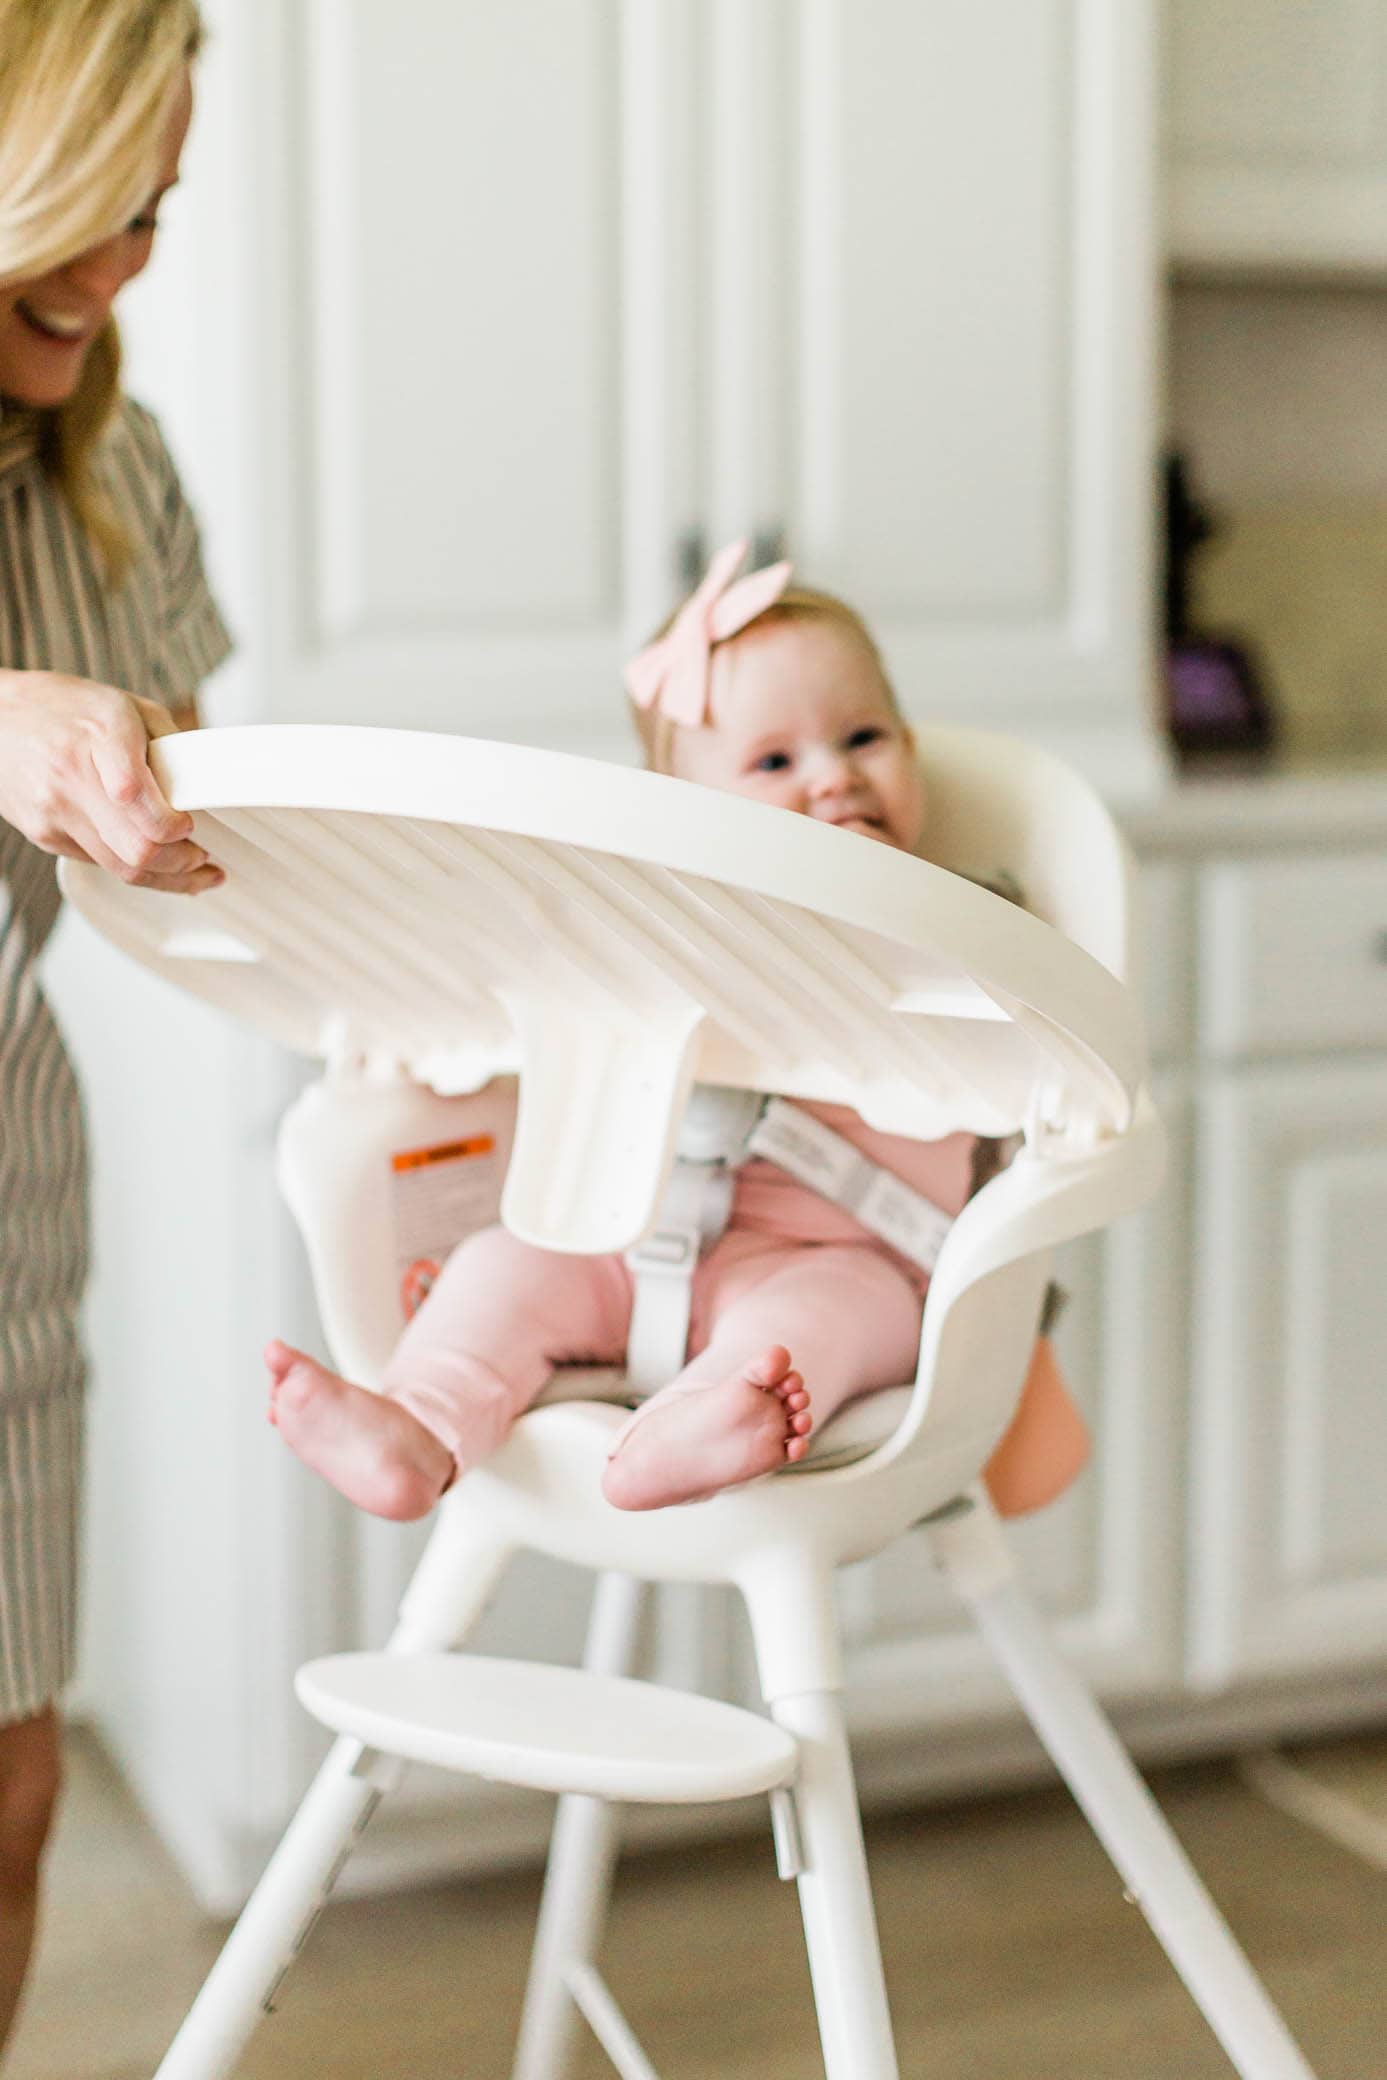 Mom putting her daughter in her high chair and placing the tray in position.